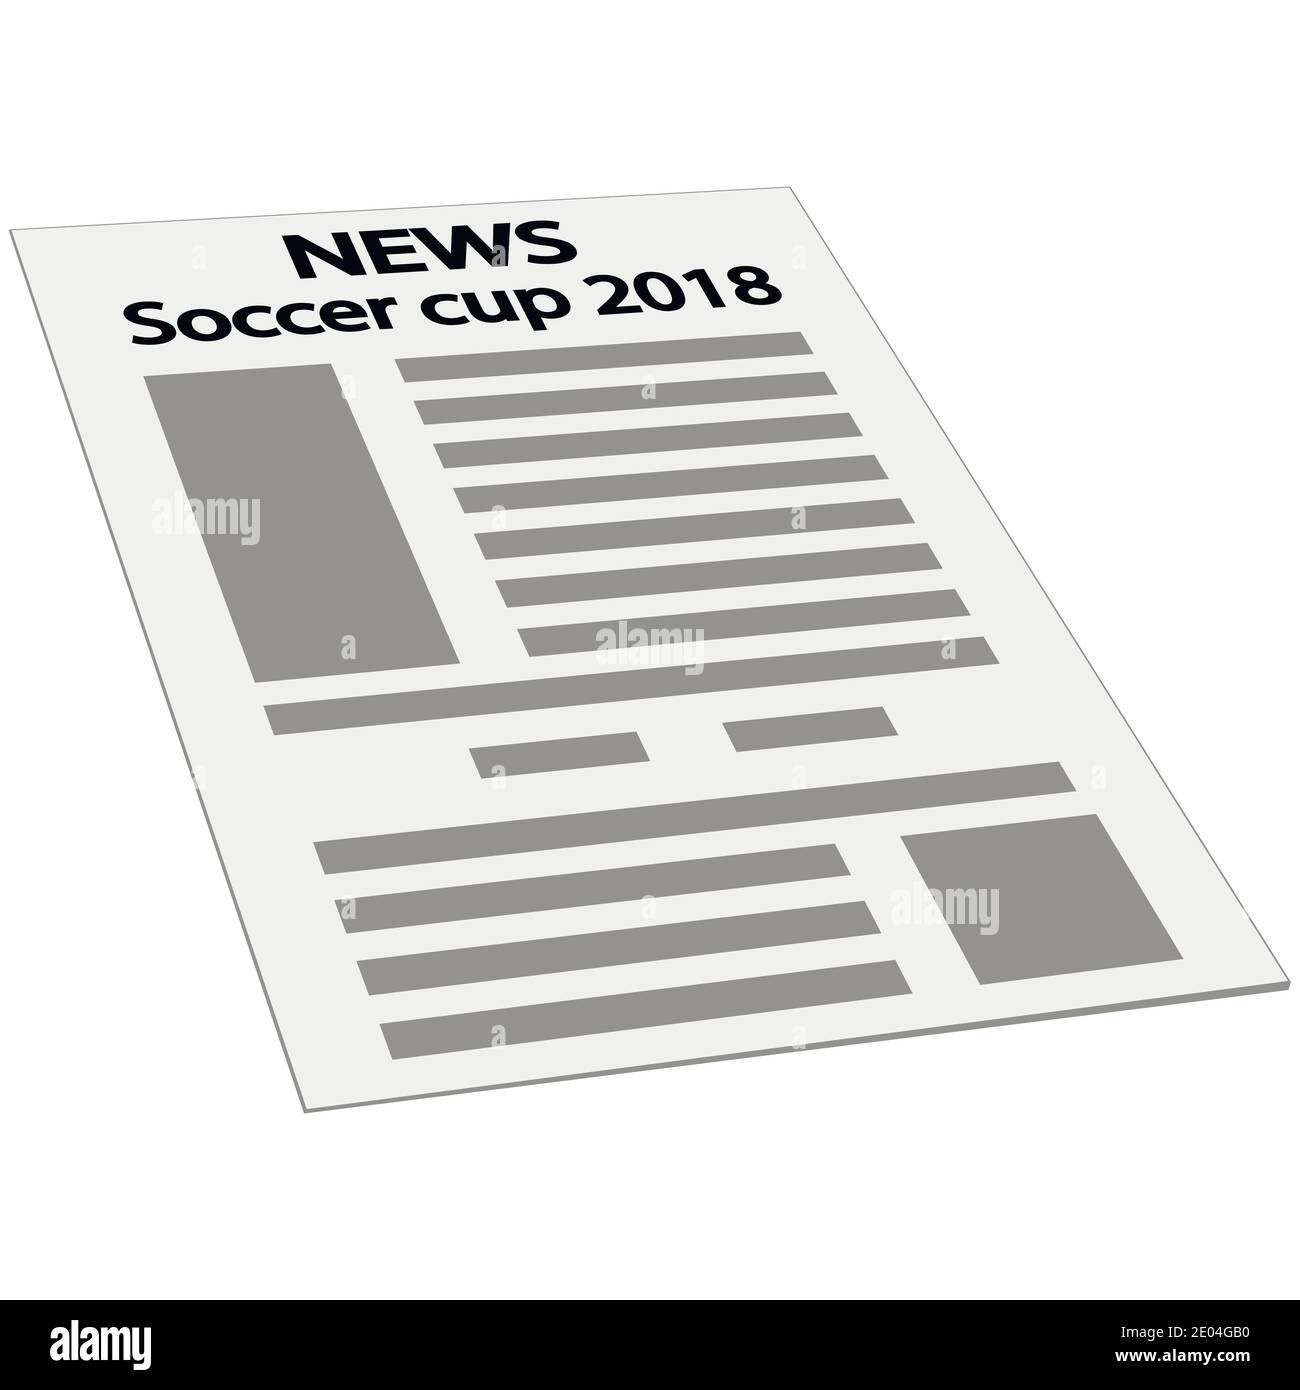 newspaper news cover page icon, mockup template first page news, isometry perspective Soccer cup 2018 international world championship tournament Stock Vector